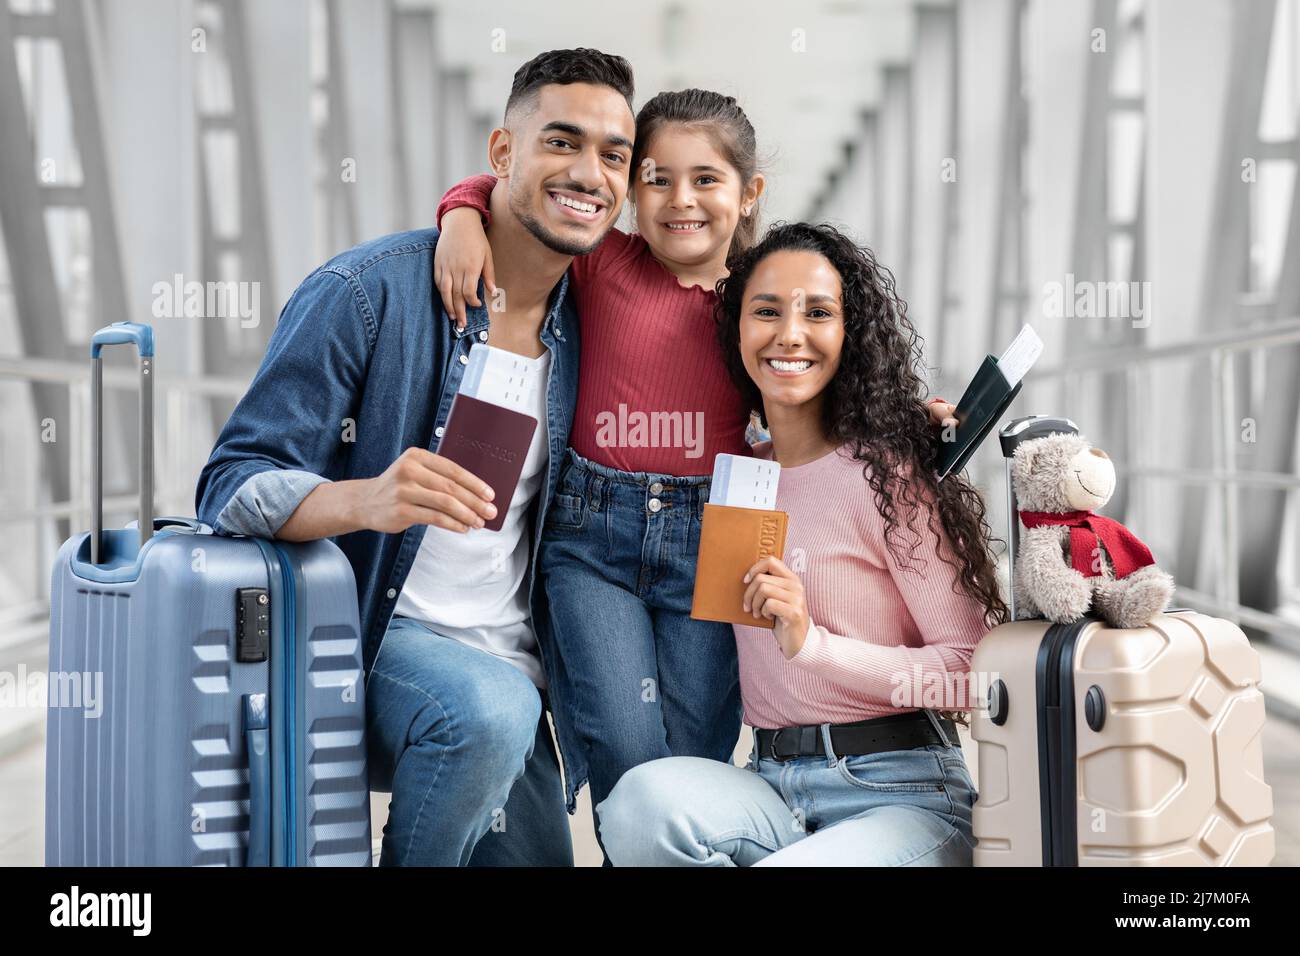 Happy arab parents and daughter relaxing in airport with baggage and tickets Stock Photo